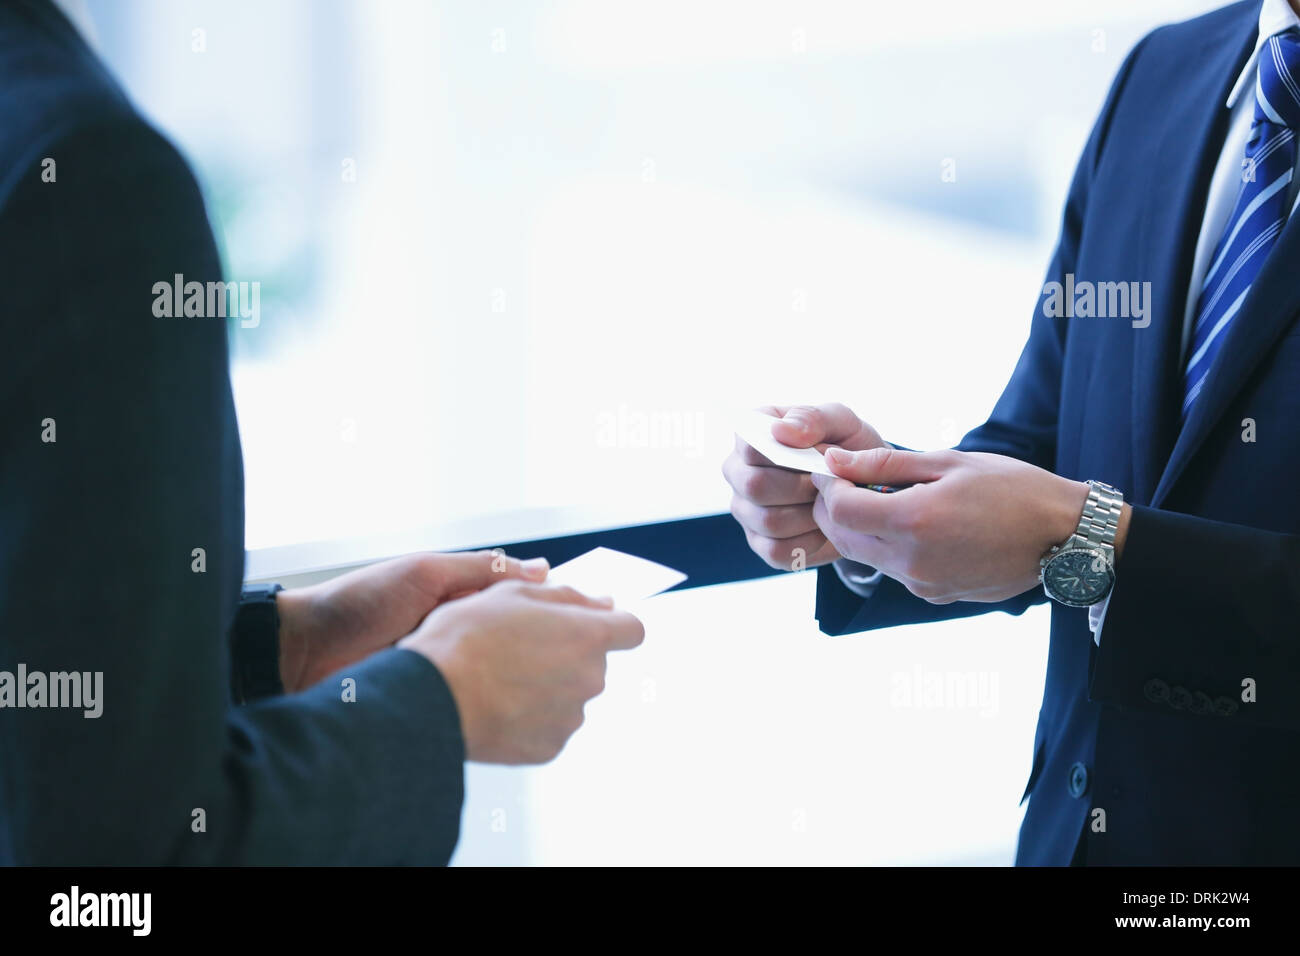 Businessmen exchanging name cards Stock Photo